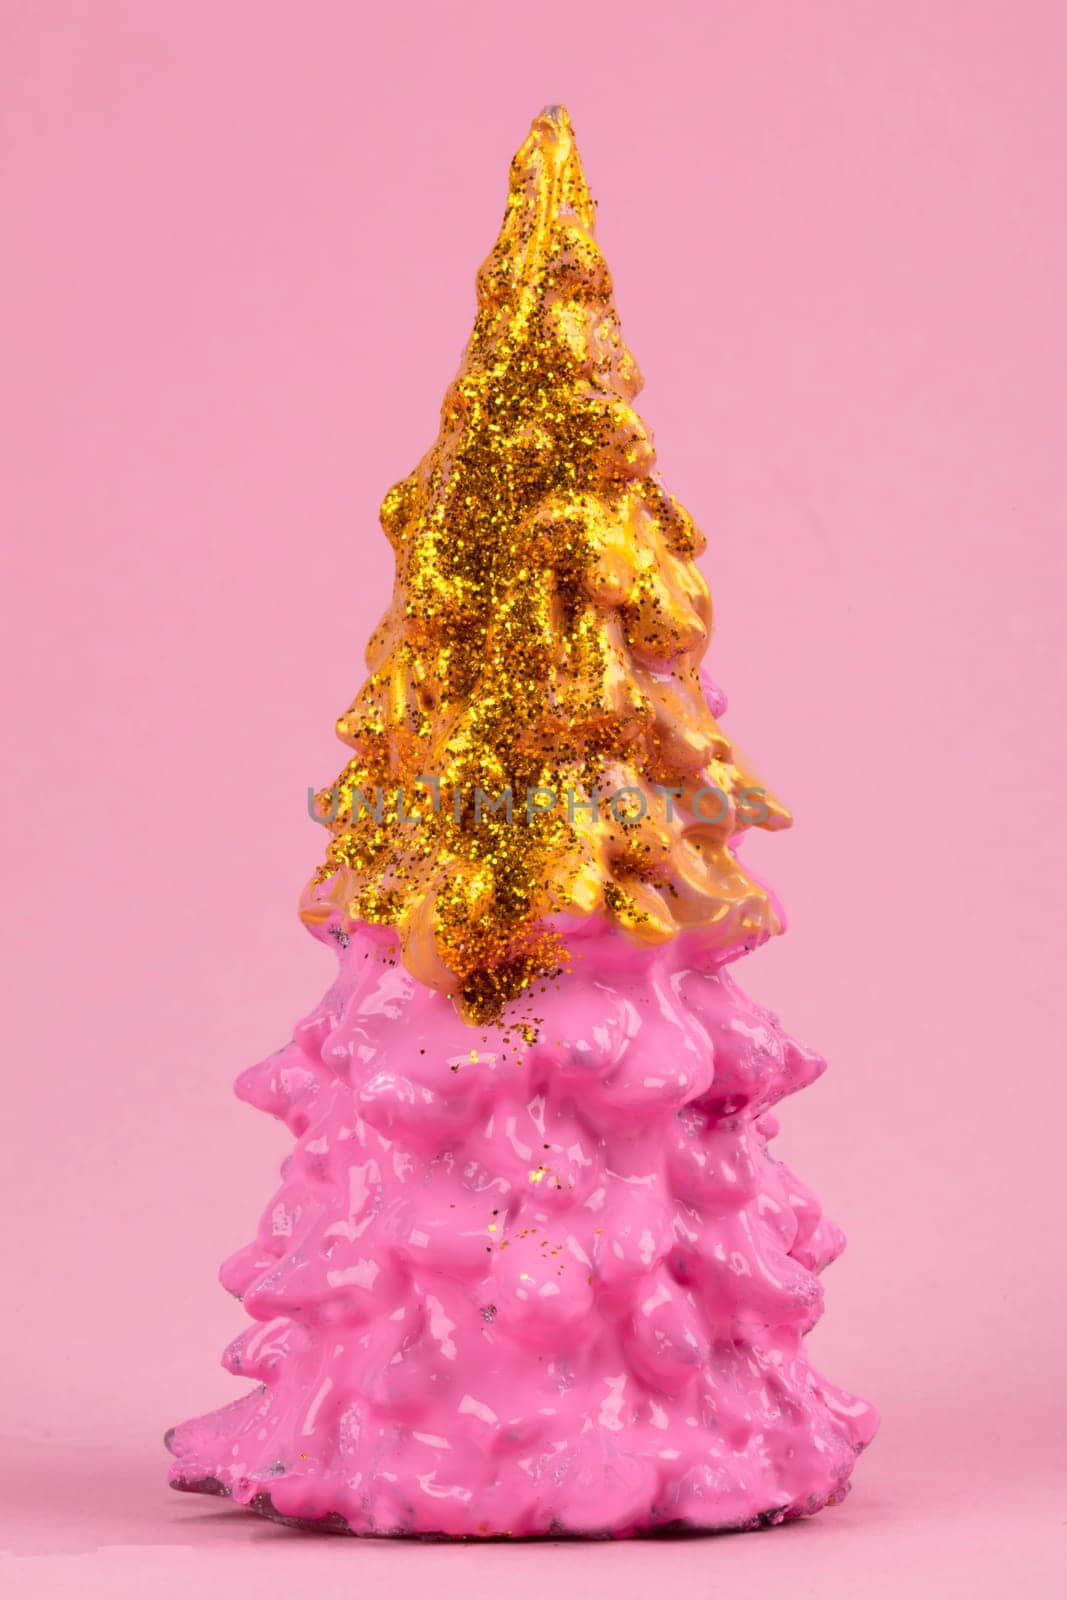 Christmas composition. Pink Christmas tree with gold on a pink background. Happy Holidays. minimal new year concept. by Sviatlana